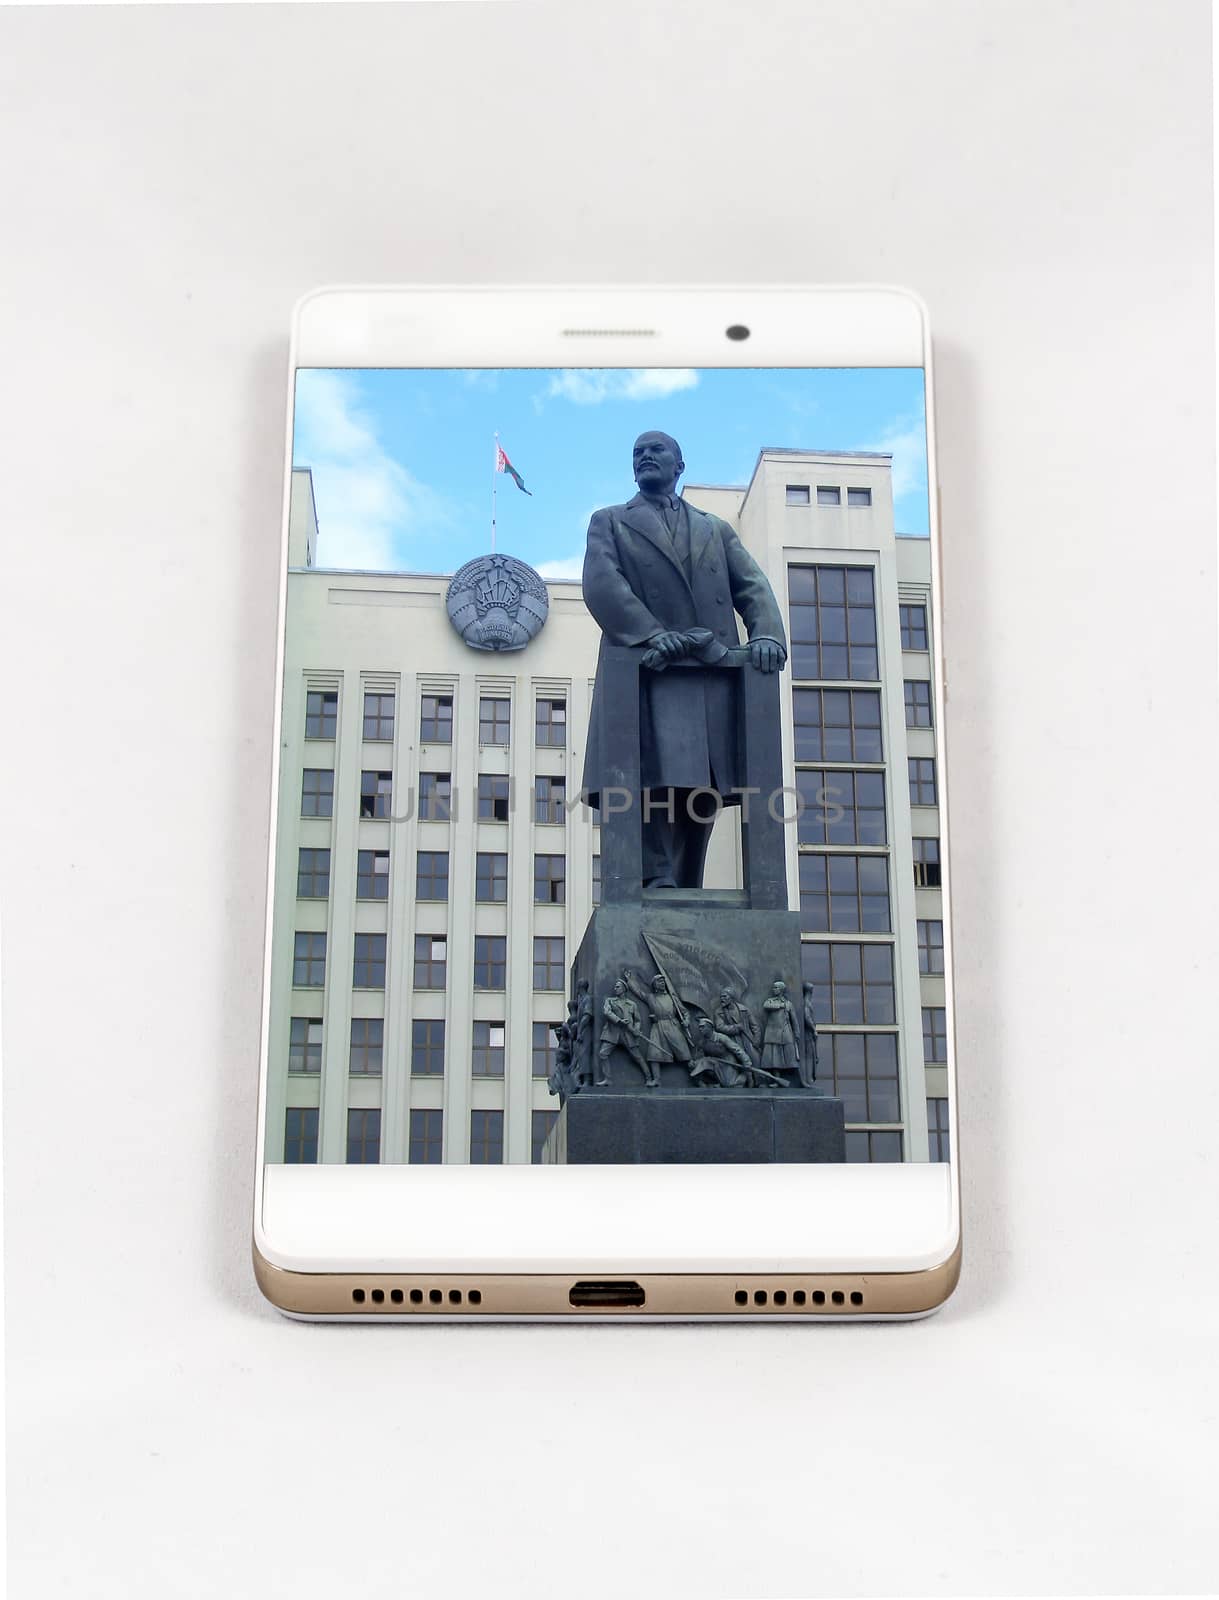 Modern smartphone with full screen picture of the Lenin Monument in Minsk, Belarus. Concept for travel smartphone photography. All images in this composition are made by me and separately available on my portfolio